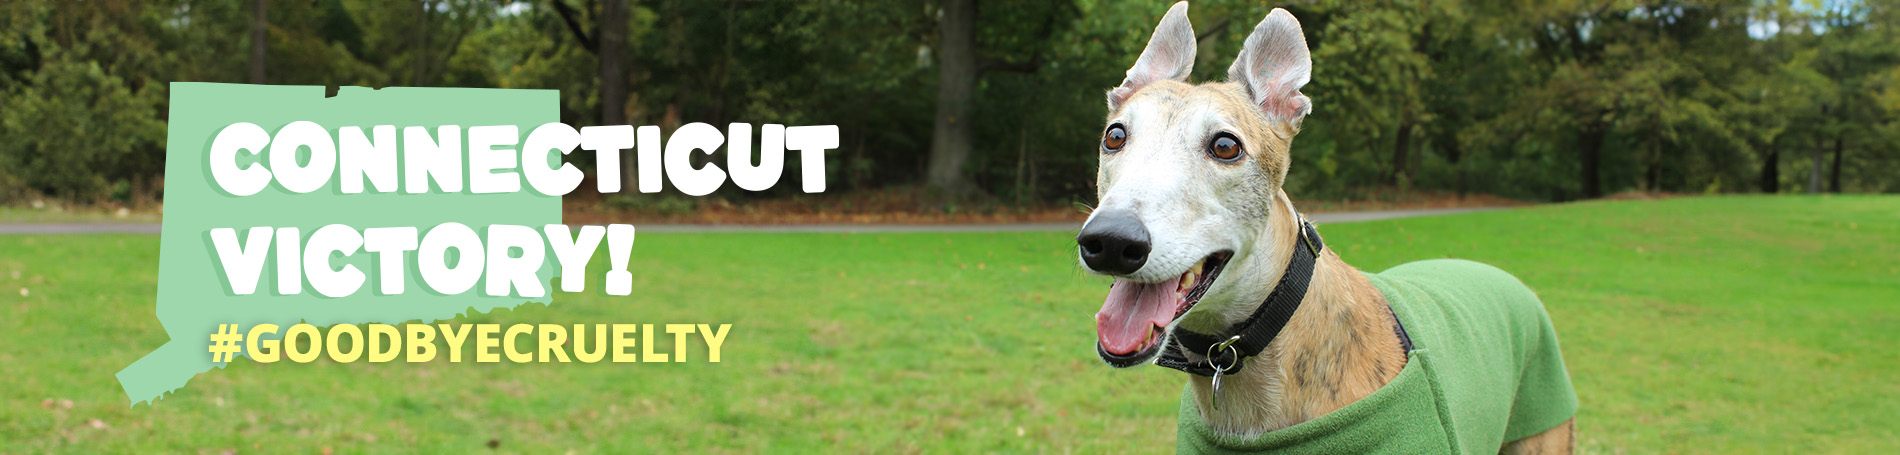 Connecticut is the 43rd state to ban dog racing! LEARN MORE